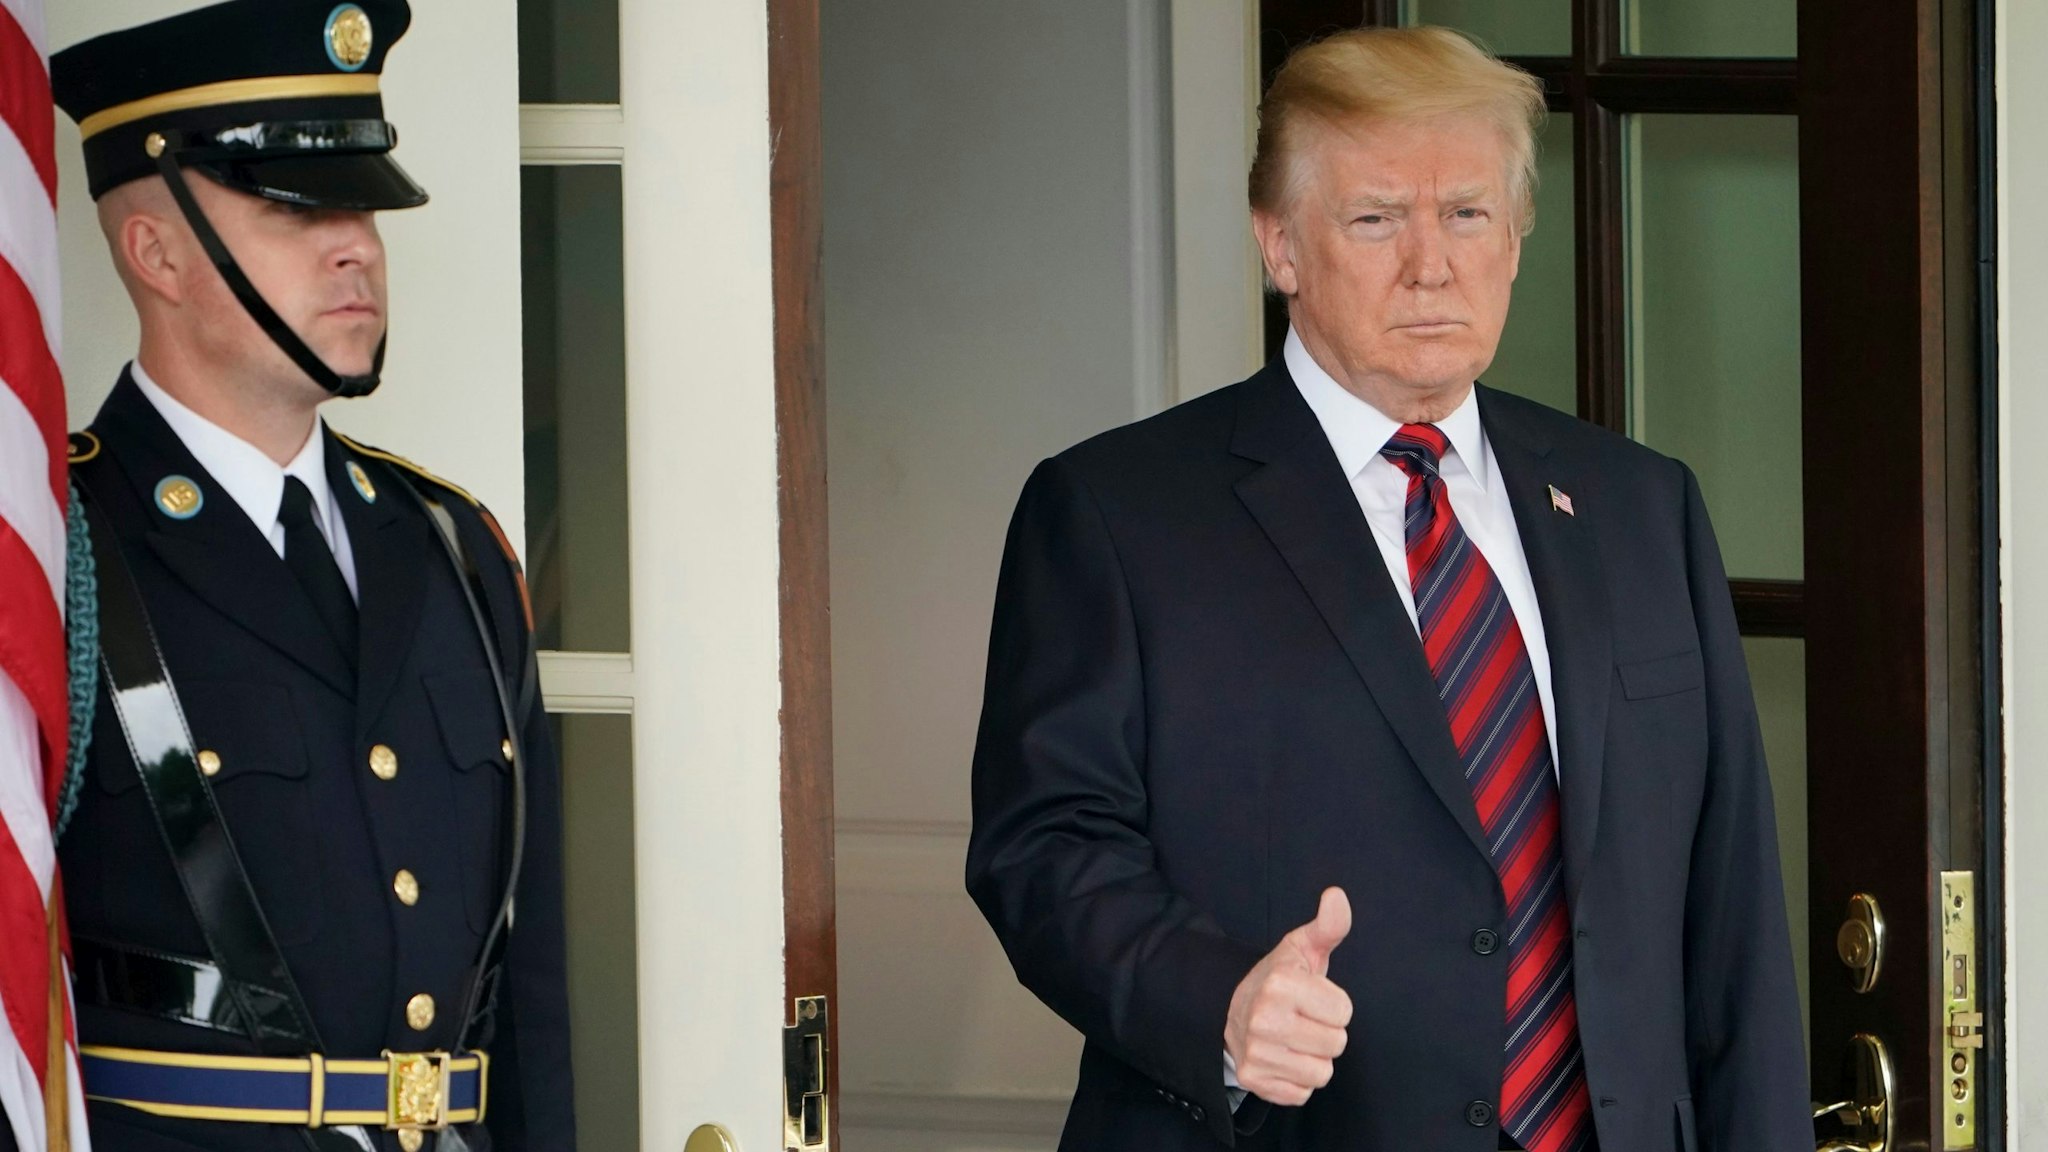 US President Donald Trump gives the thumbs-up as he awaits the arrival of South Korea's President Moon Jae-in outside of the West Wing of the White House on May 22, 2018 in Washington, DC. - Donald Trump welcomed South Korea's president to the White House Tuesday, a high stakes and potentially testy meeting that could decide whether the US leader's much-vaunted summit with Kim Jong Un goes ahead. (Photo by Mandel Ngan / AFP) (Photo credit should read MANDEL NGAN/AFP via Getty Images)